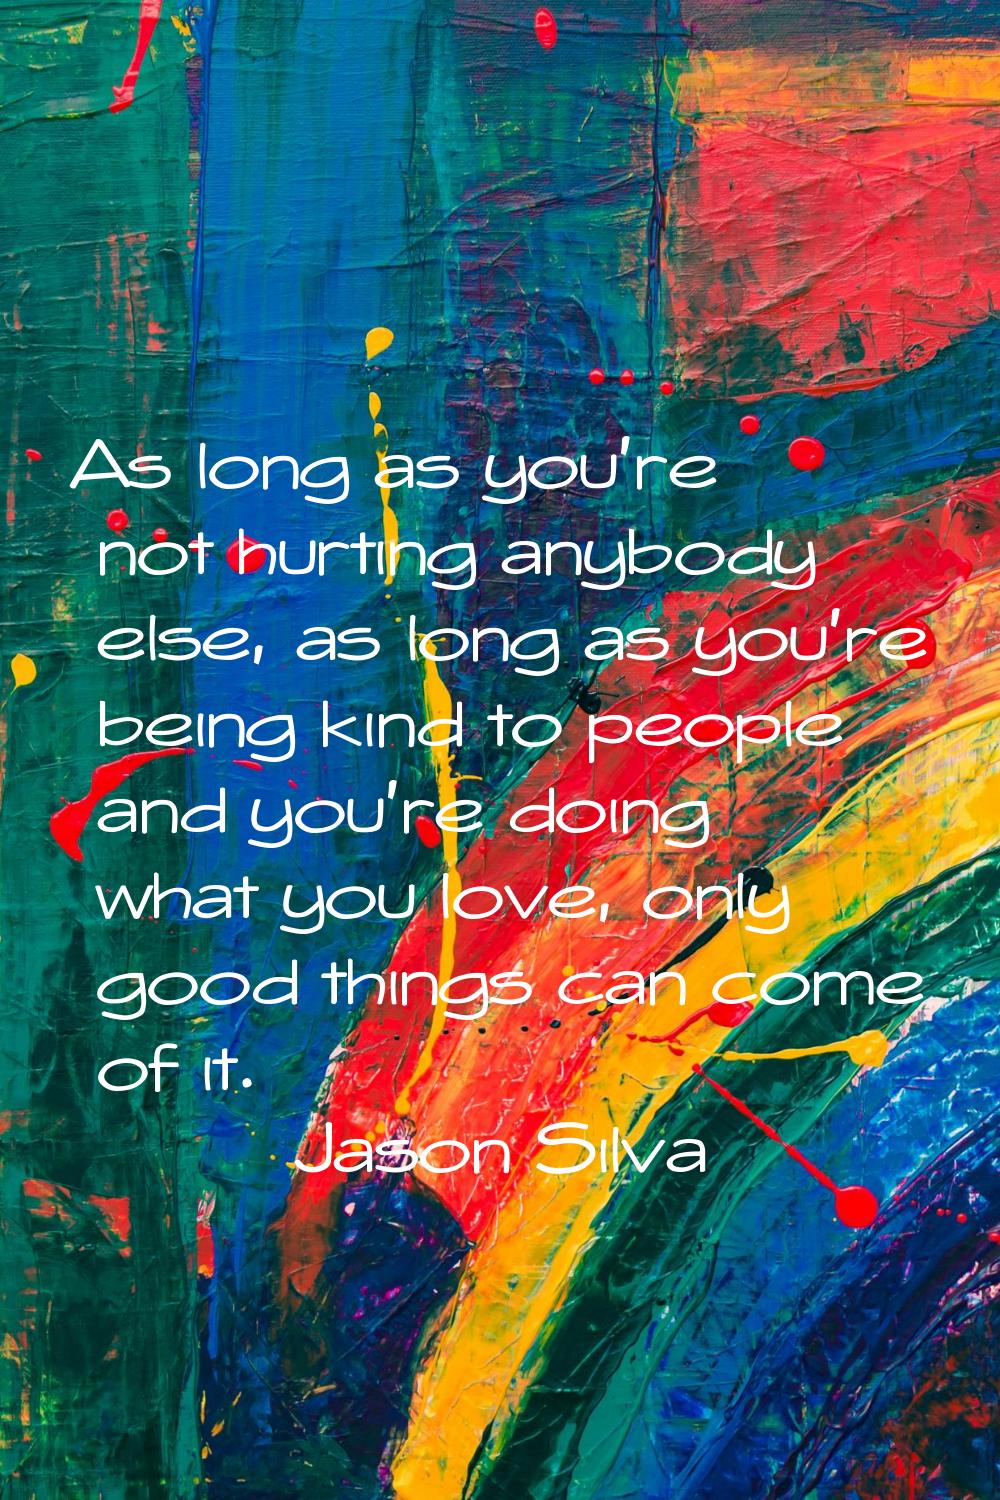 As long as you're not hurting anybody else, as long as you're being kind to people and you're doing